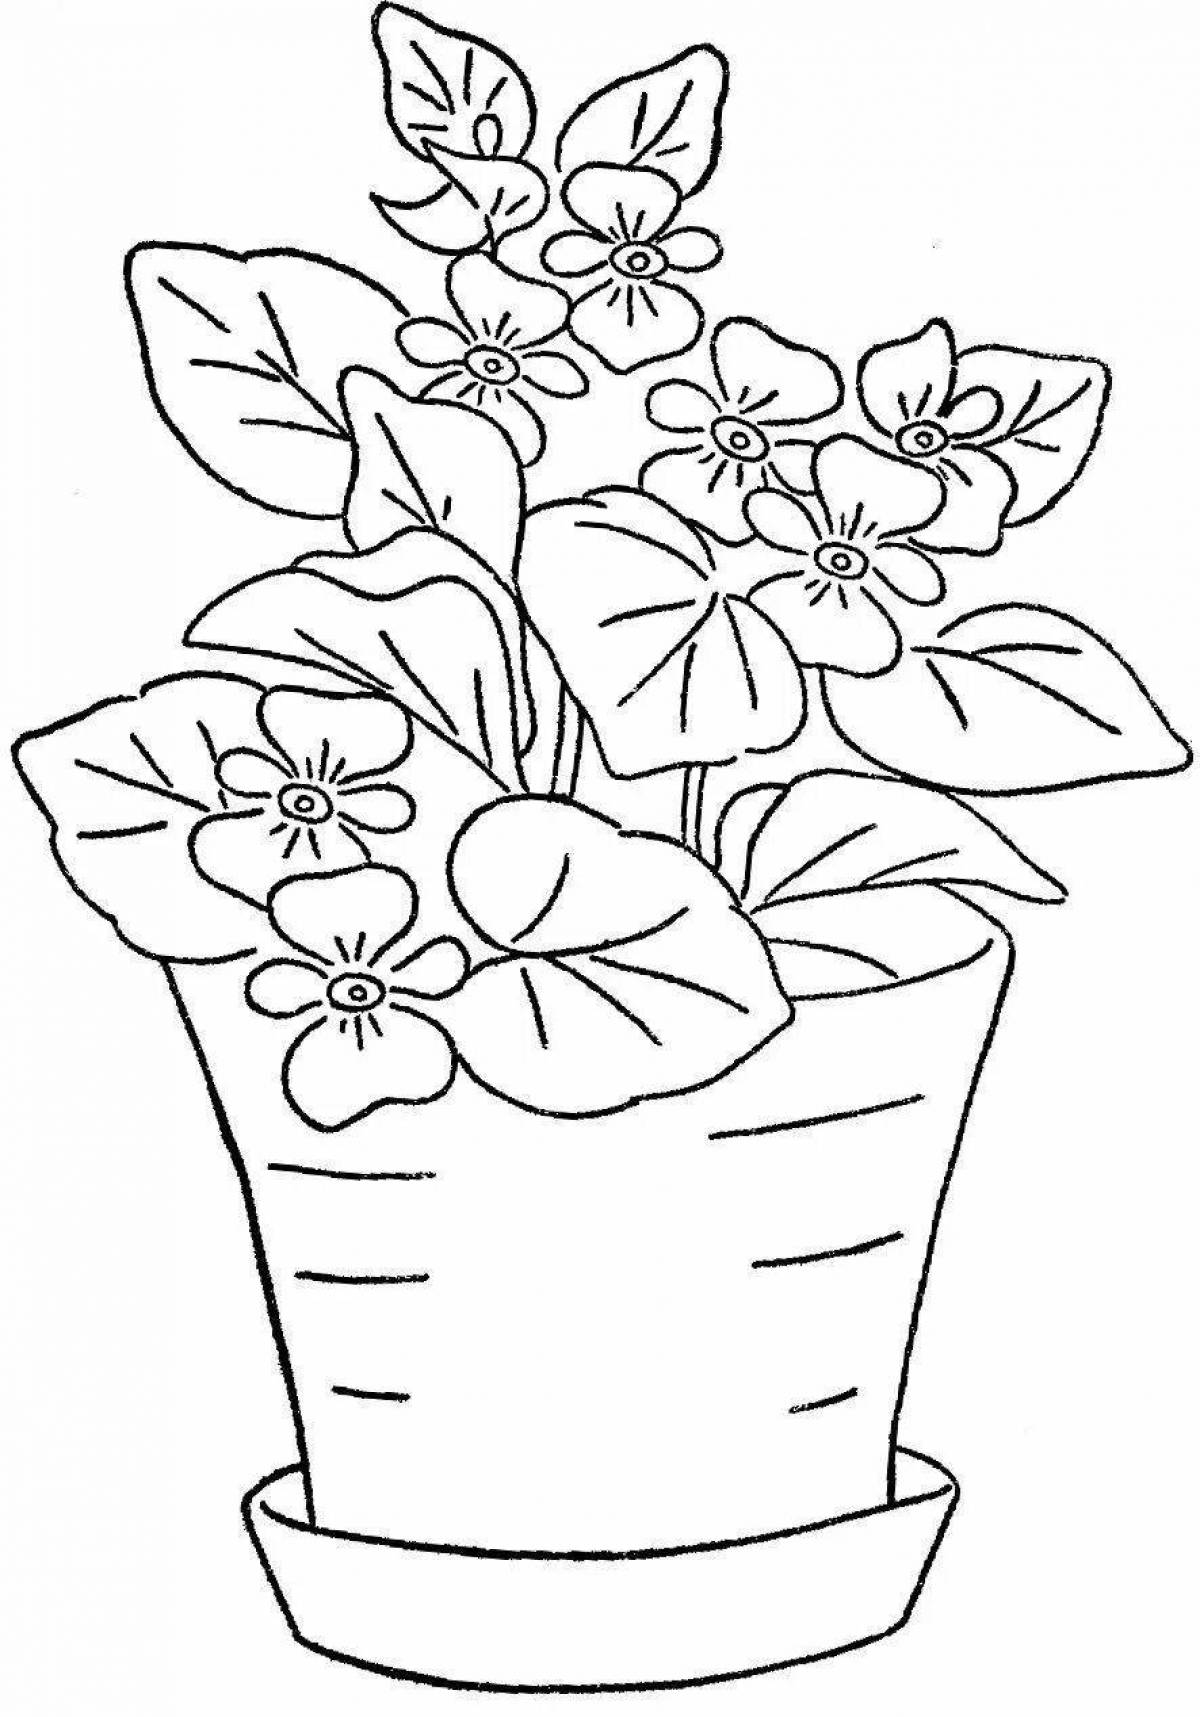 Blissful indoor flowers coloring book for children 4-5 years old